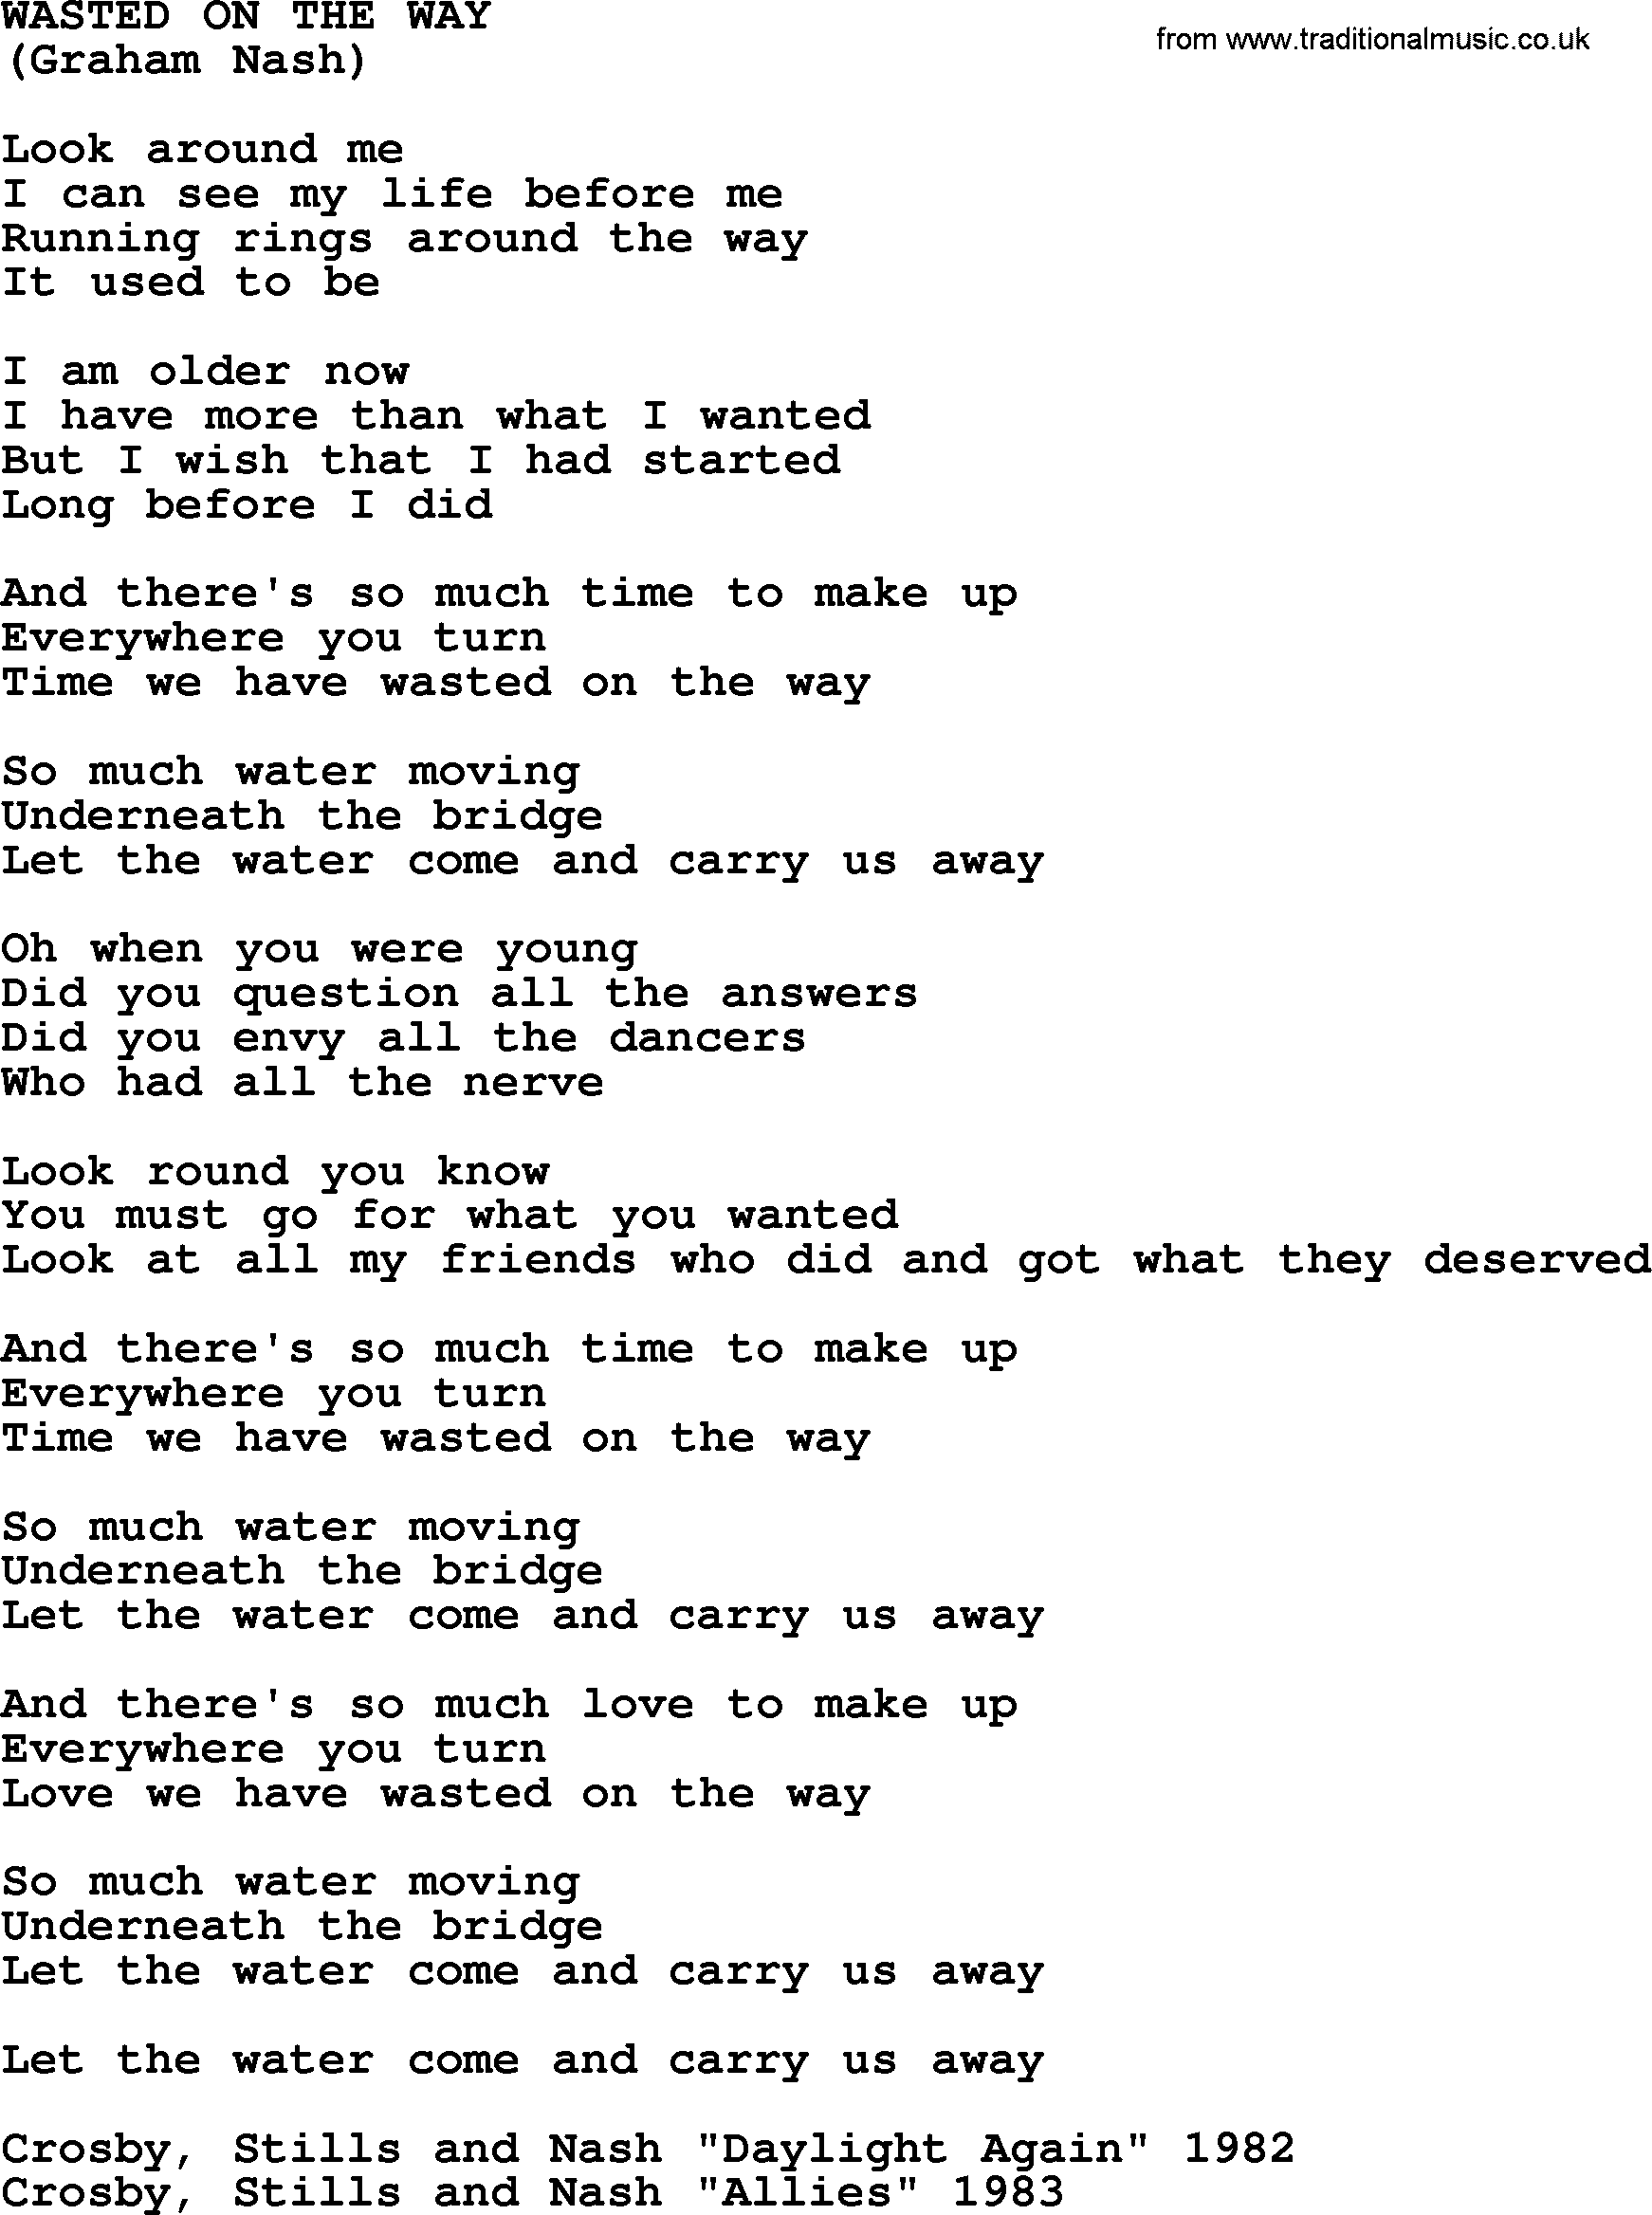 The Byrds song Wasted On The Way, lyrics